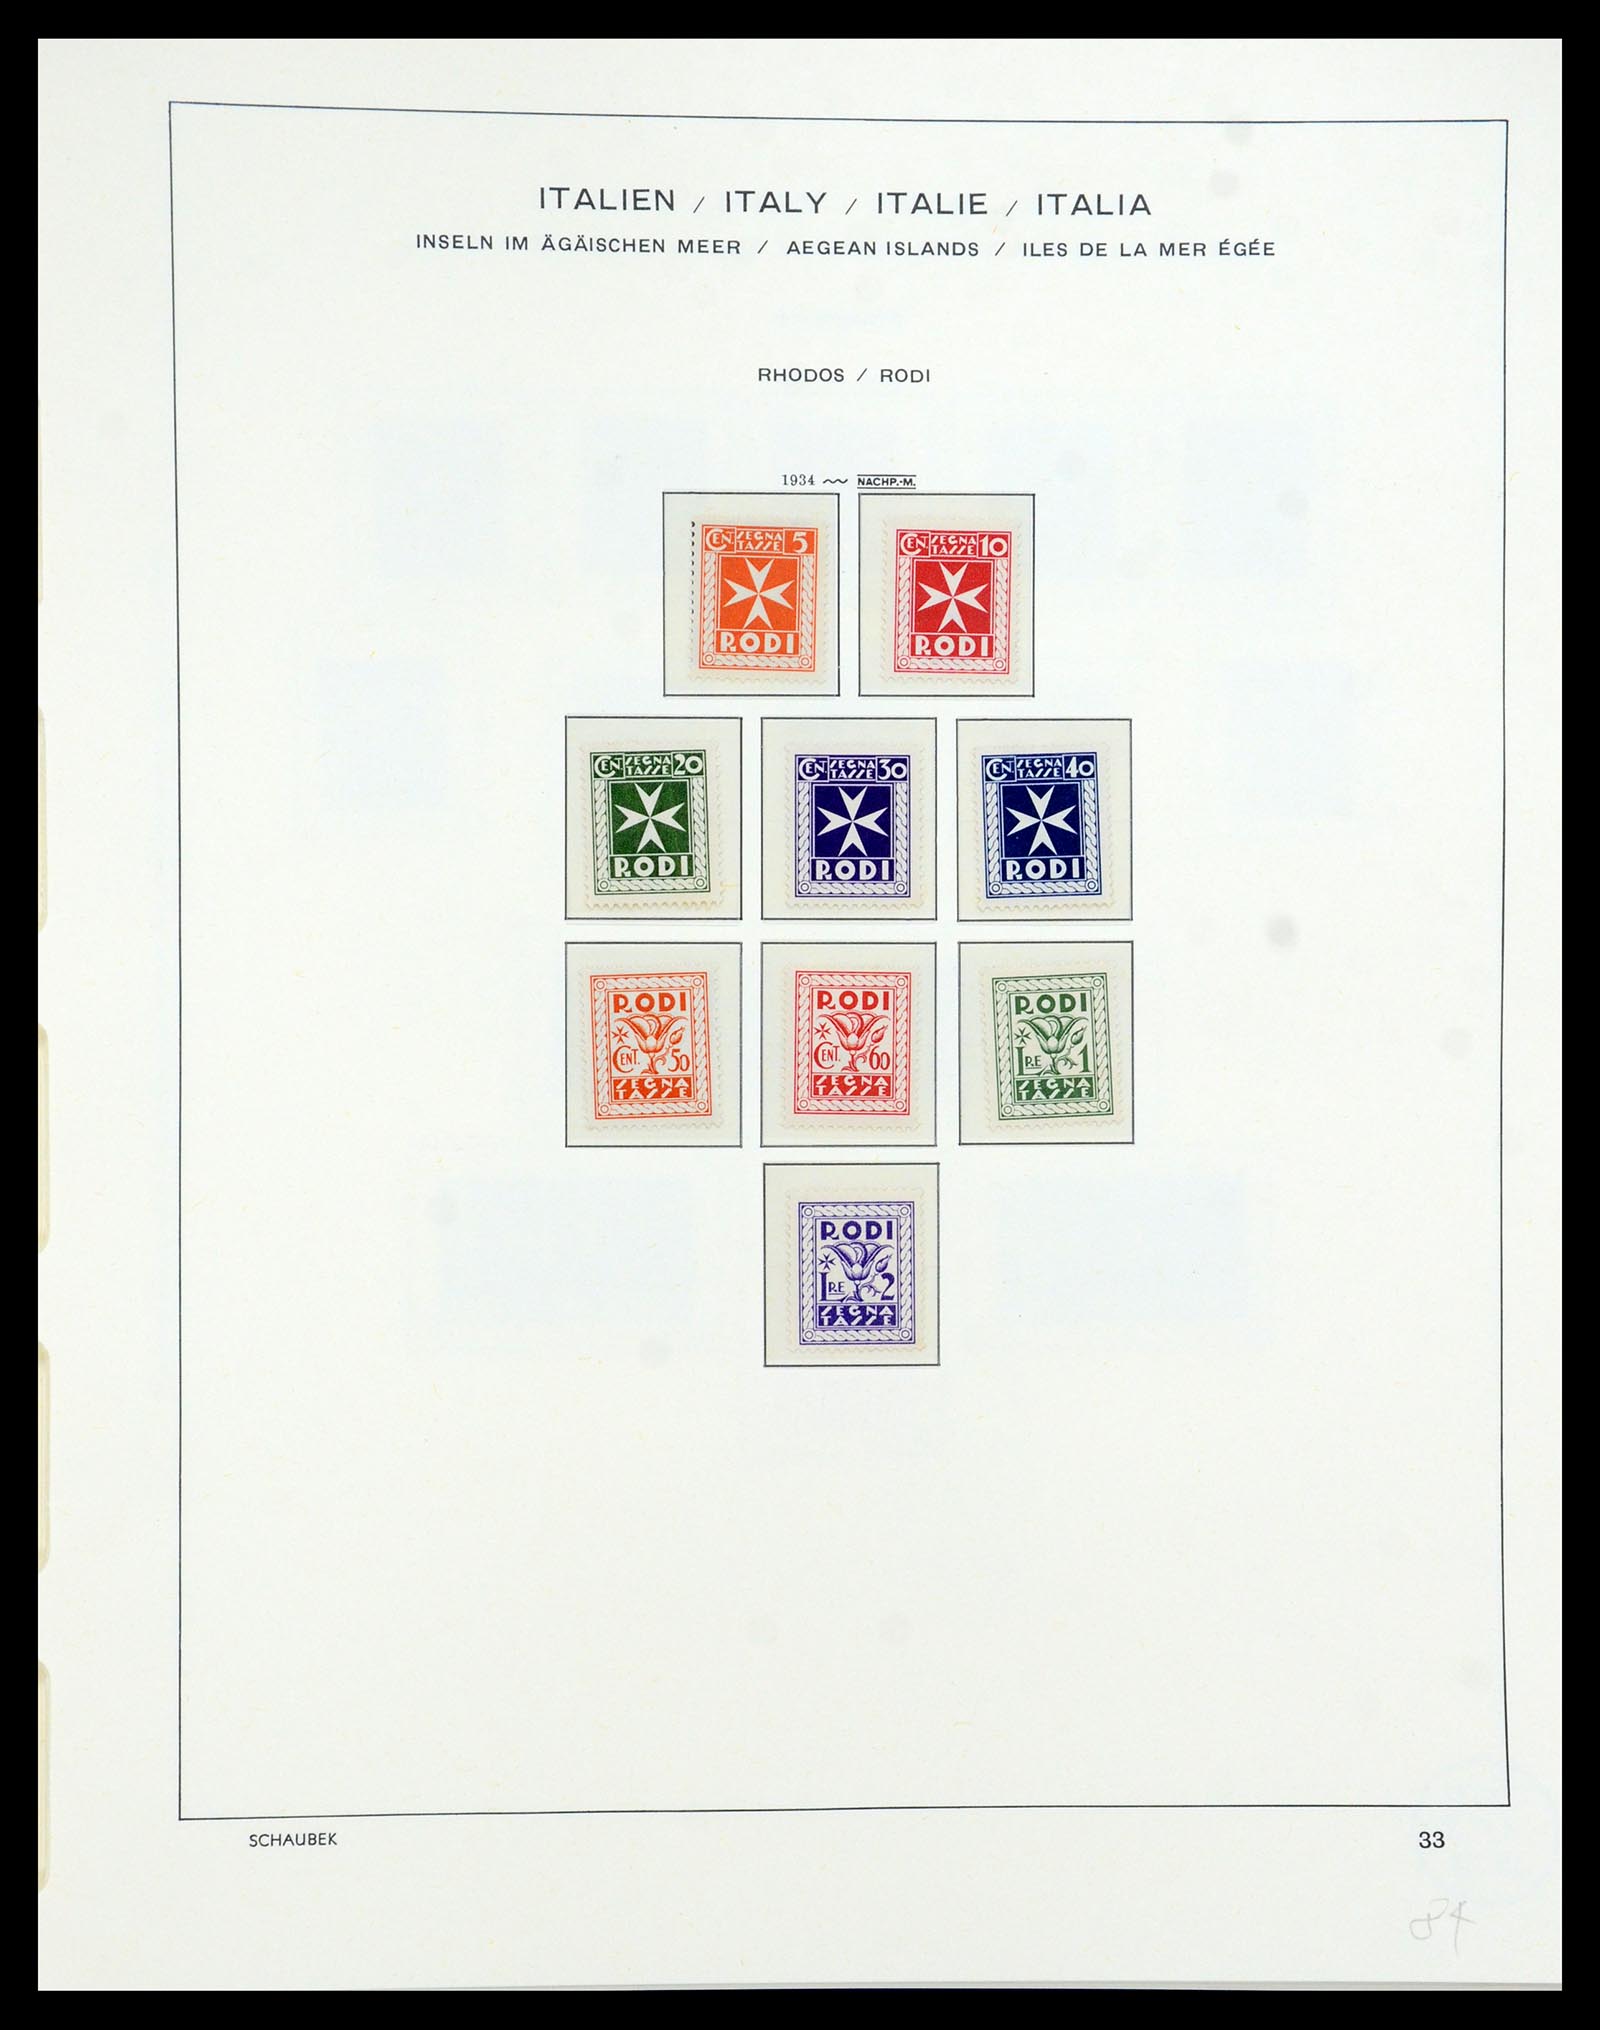 36181 048 - Stamp collection 36181 Italian Aegean Islands 1912-1941.